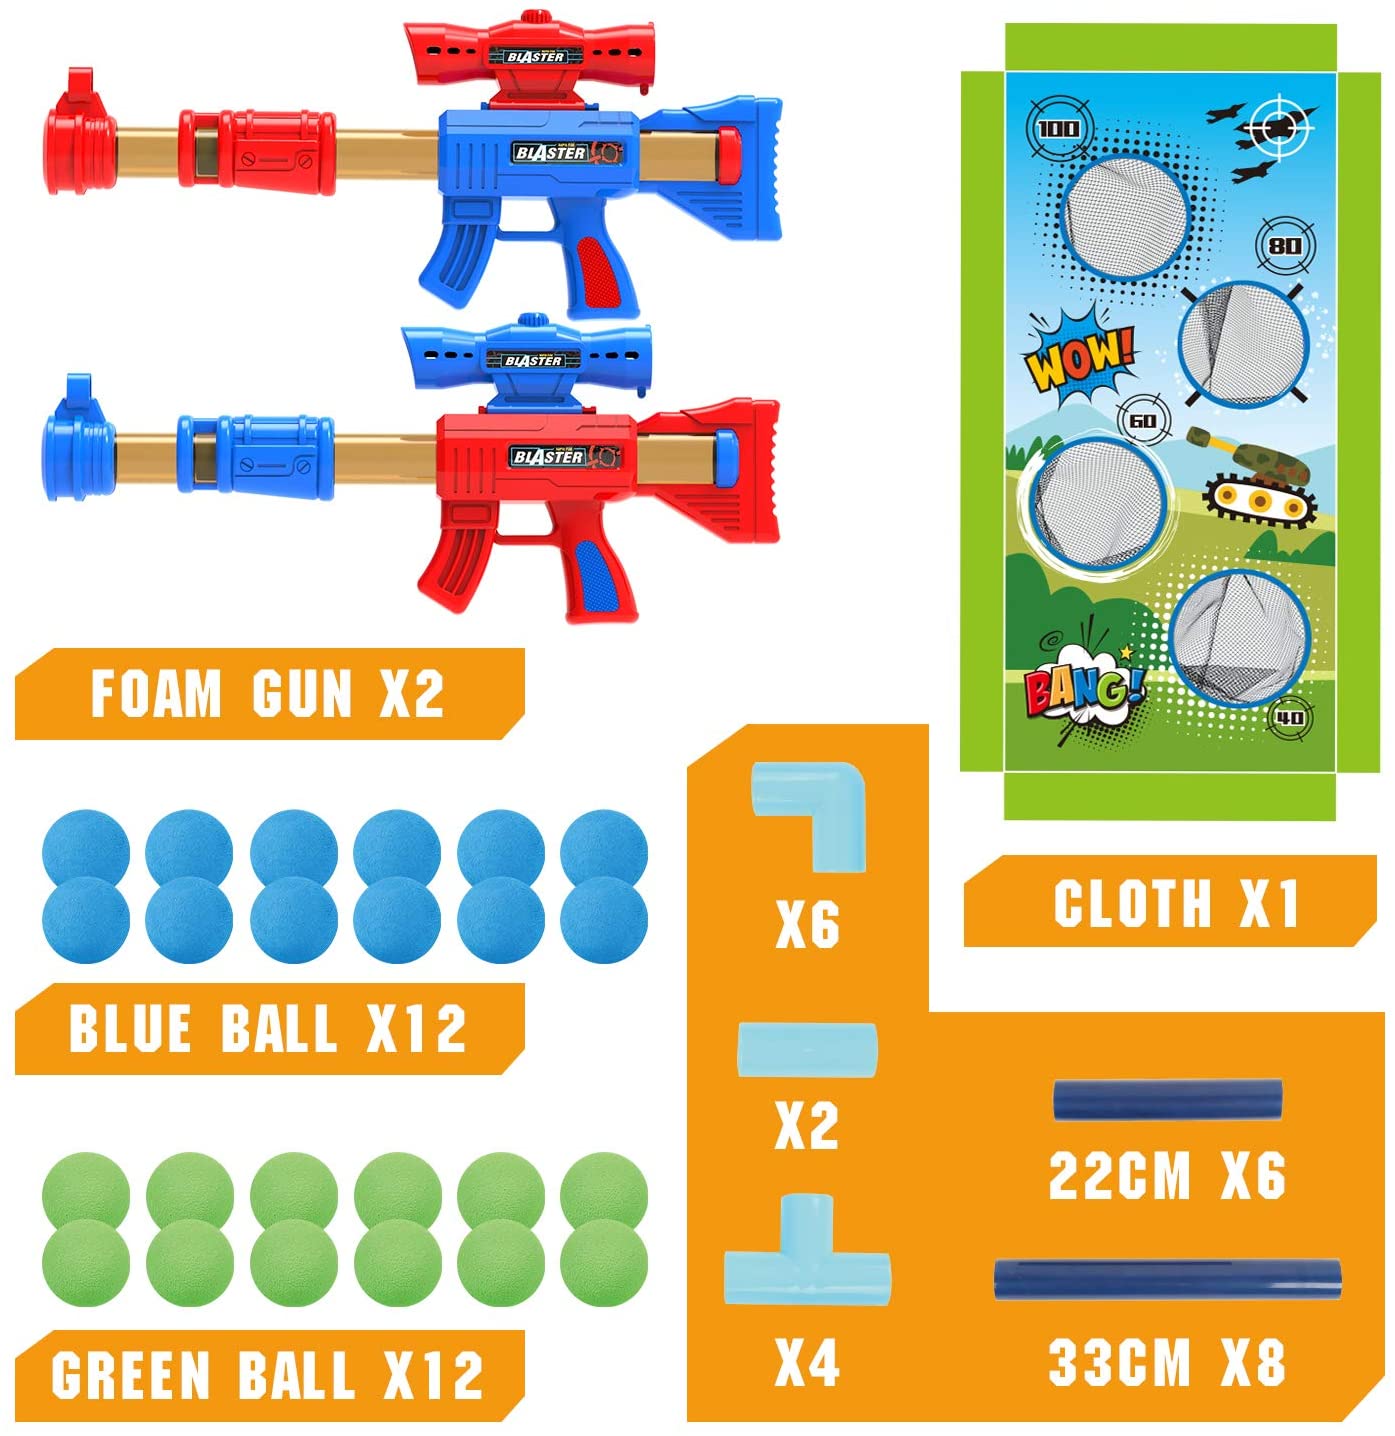 24 Foam Balls STOTOY Shooting Game for Nerf Toys 5 6 7 8 9 10+ Years Olds Boys and Girls,2PK Foam Ball Popper Air Toy Guns with Standing Shooting Target Indoor-Outdoor Activity Game for Kids 